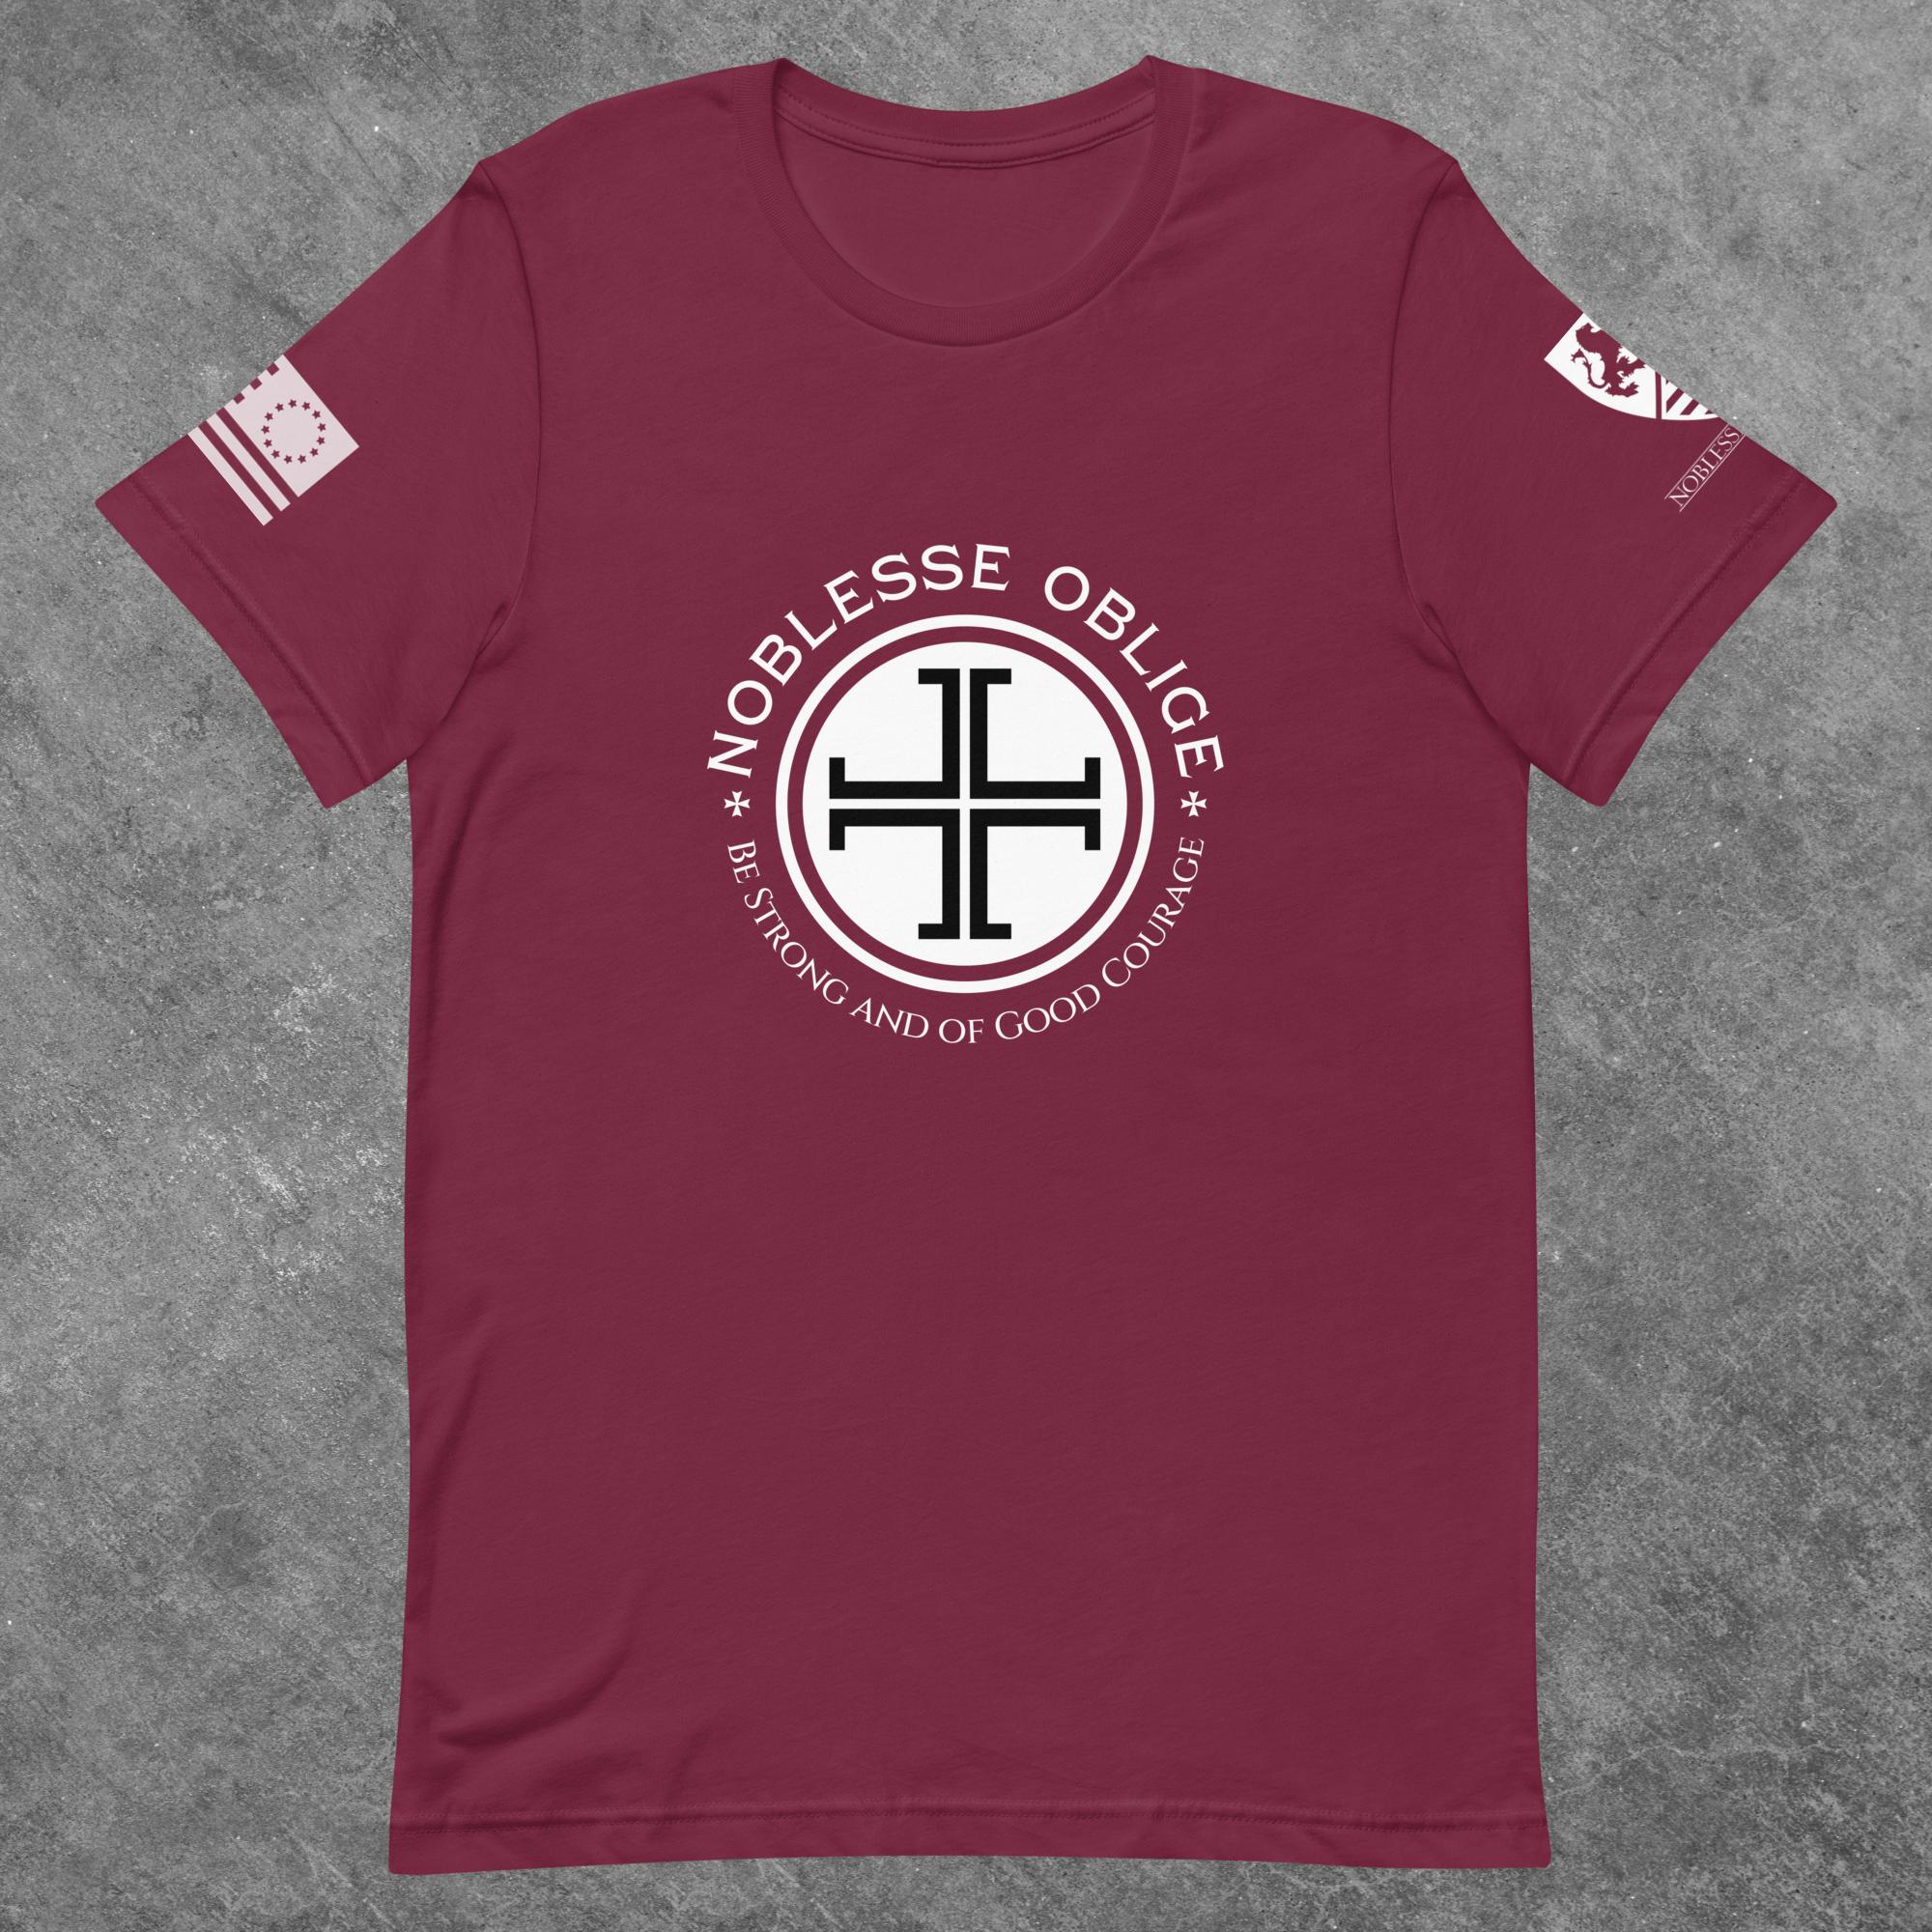 Be Strong and Of Good Courage - Heather T-Shirt - Noblesse Oblige Apparel